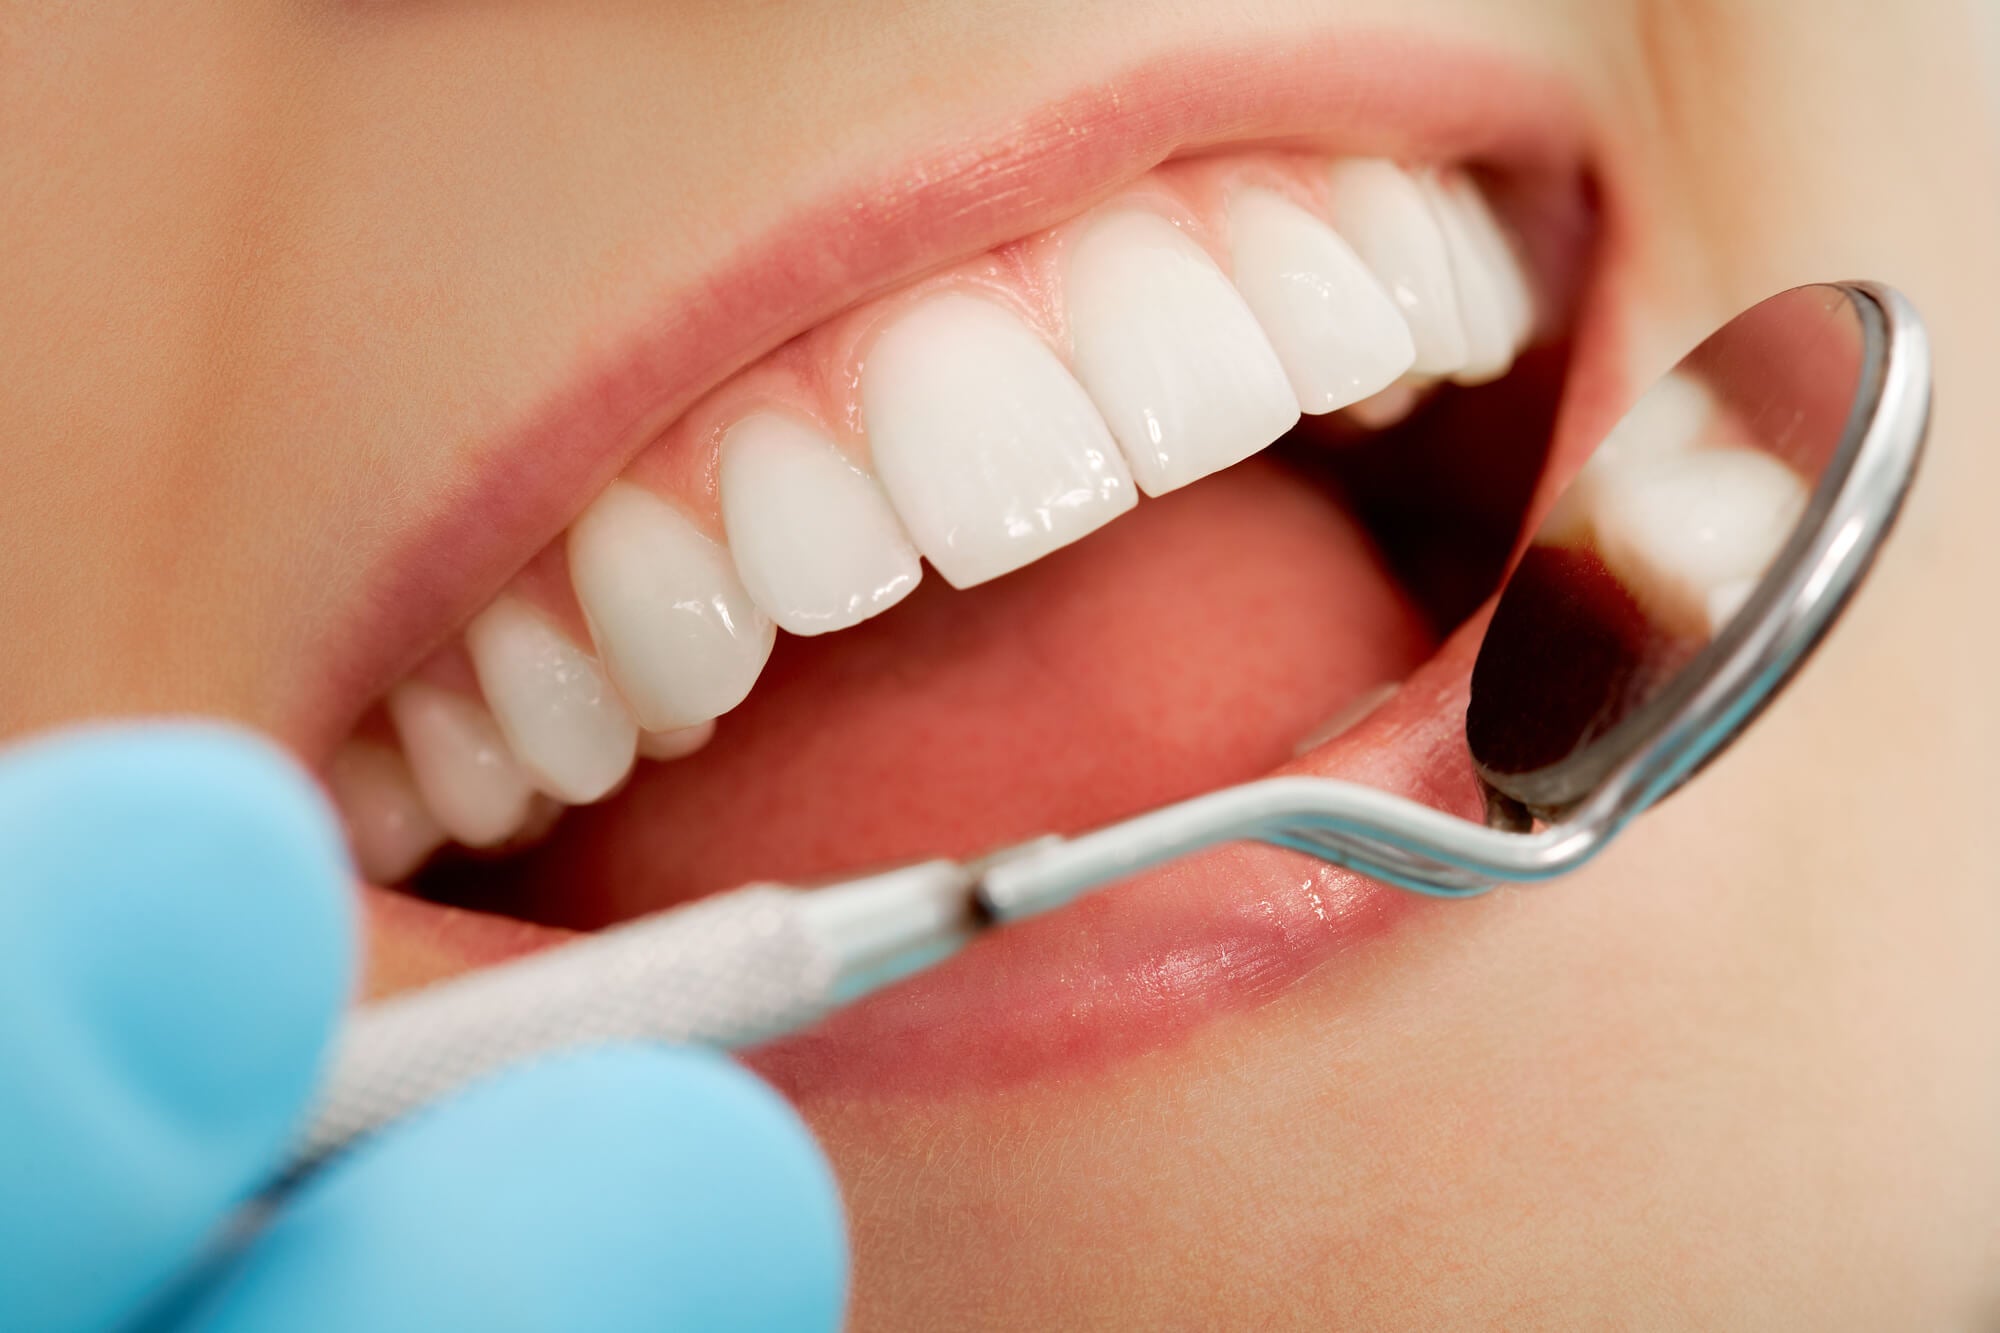 What Really Causes Tooth Decay?